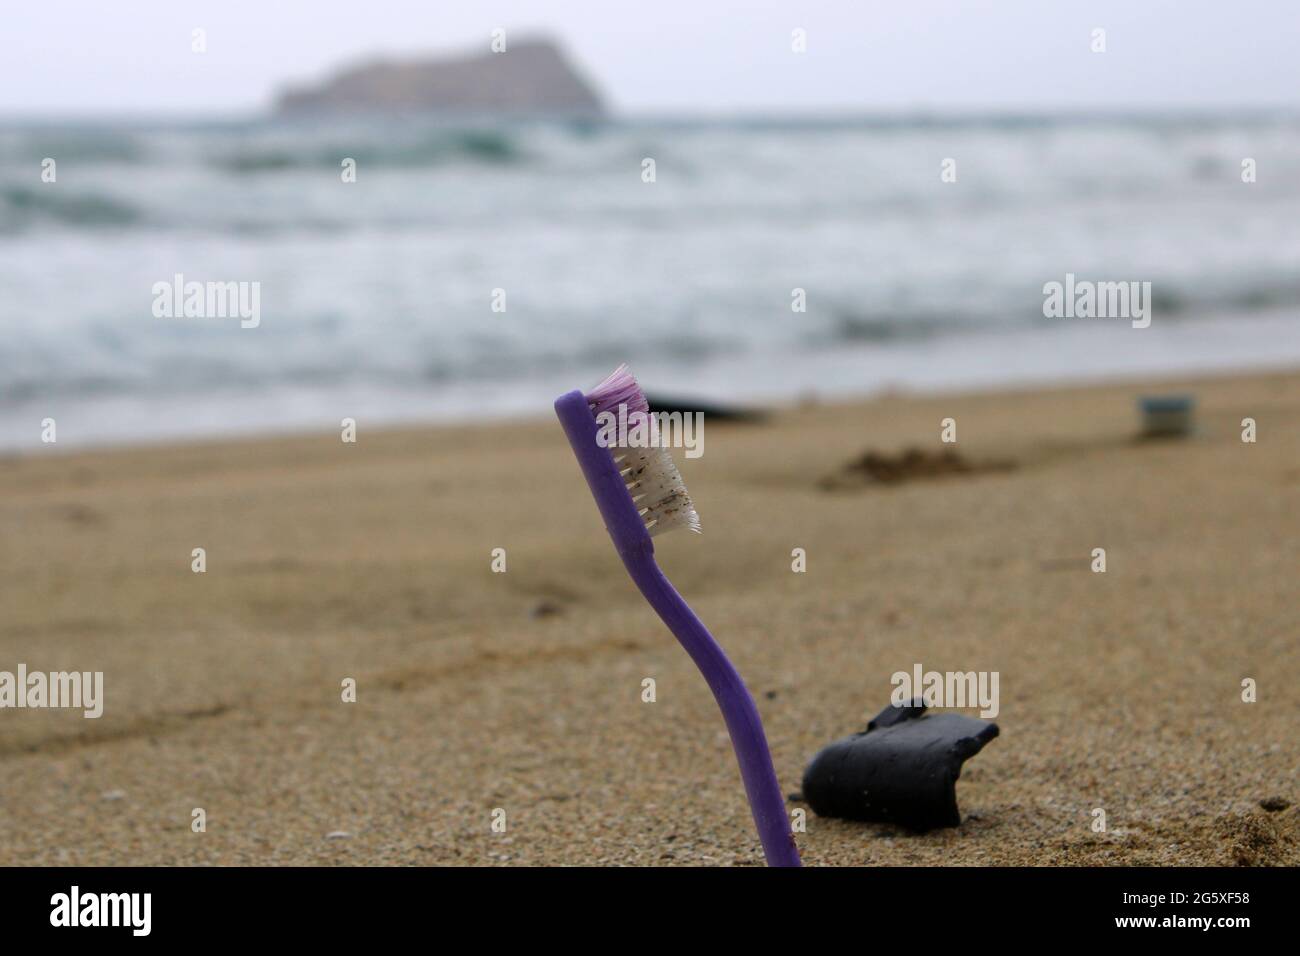 toothbrush as part of all the garbage on the beach. Stock Photo